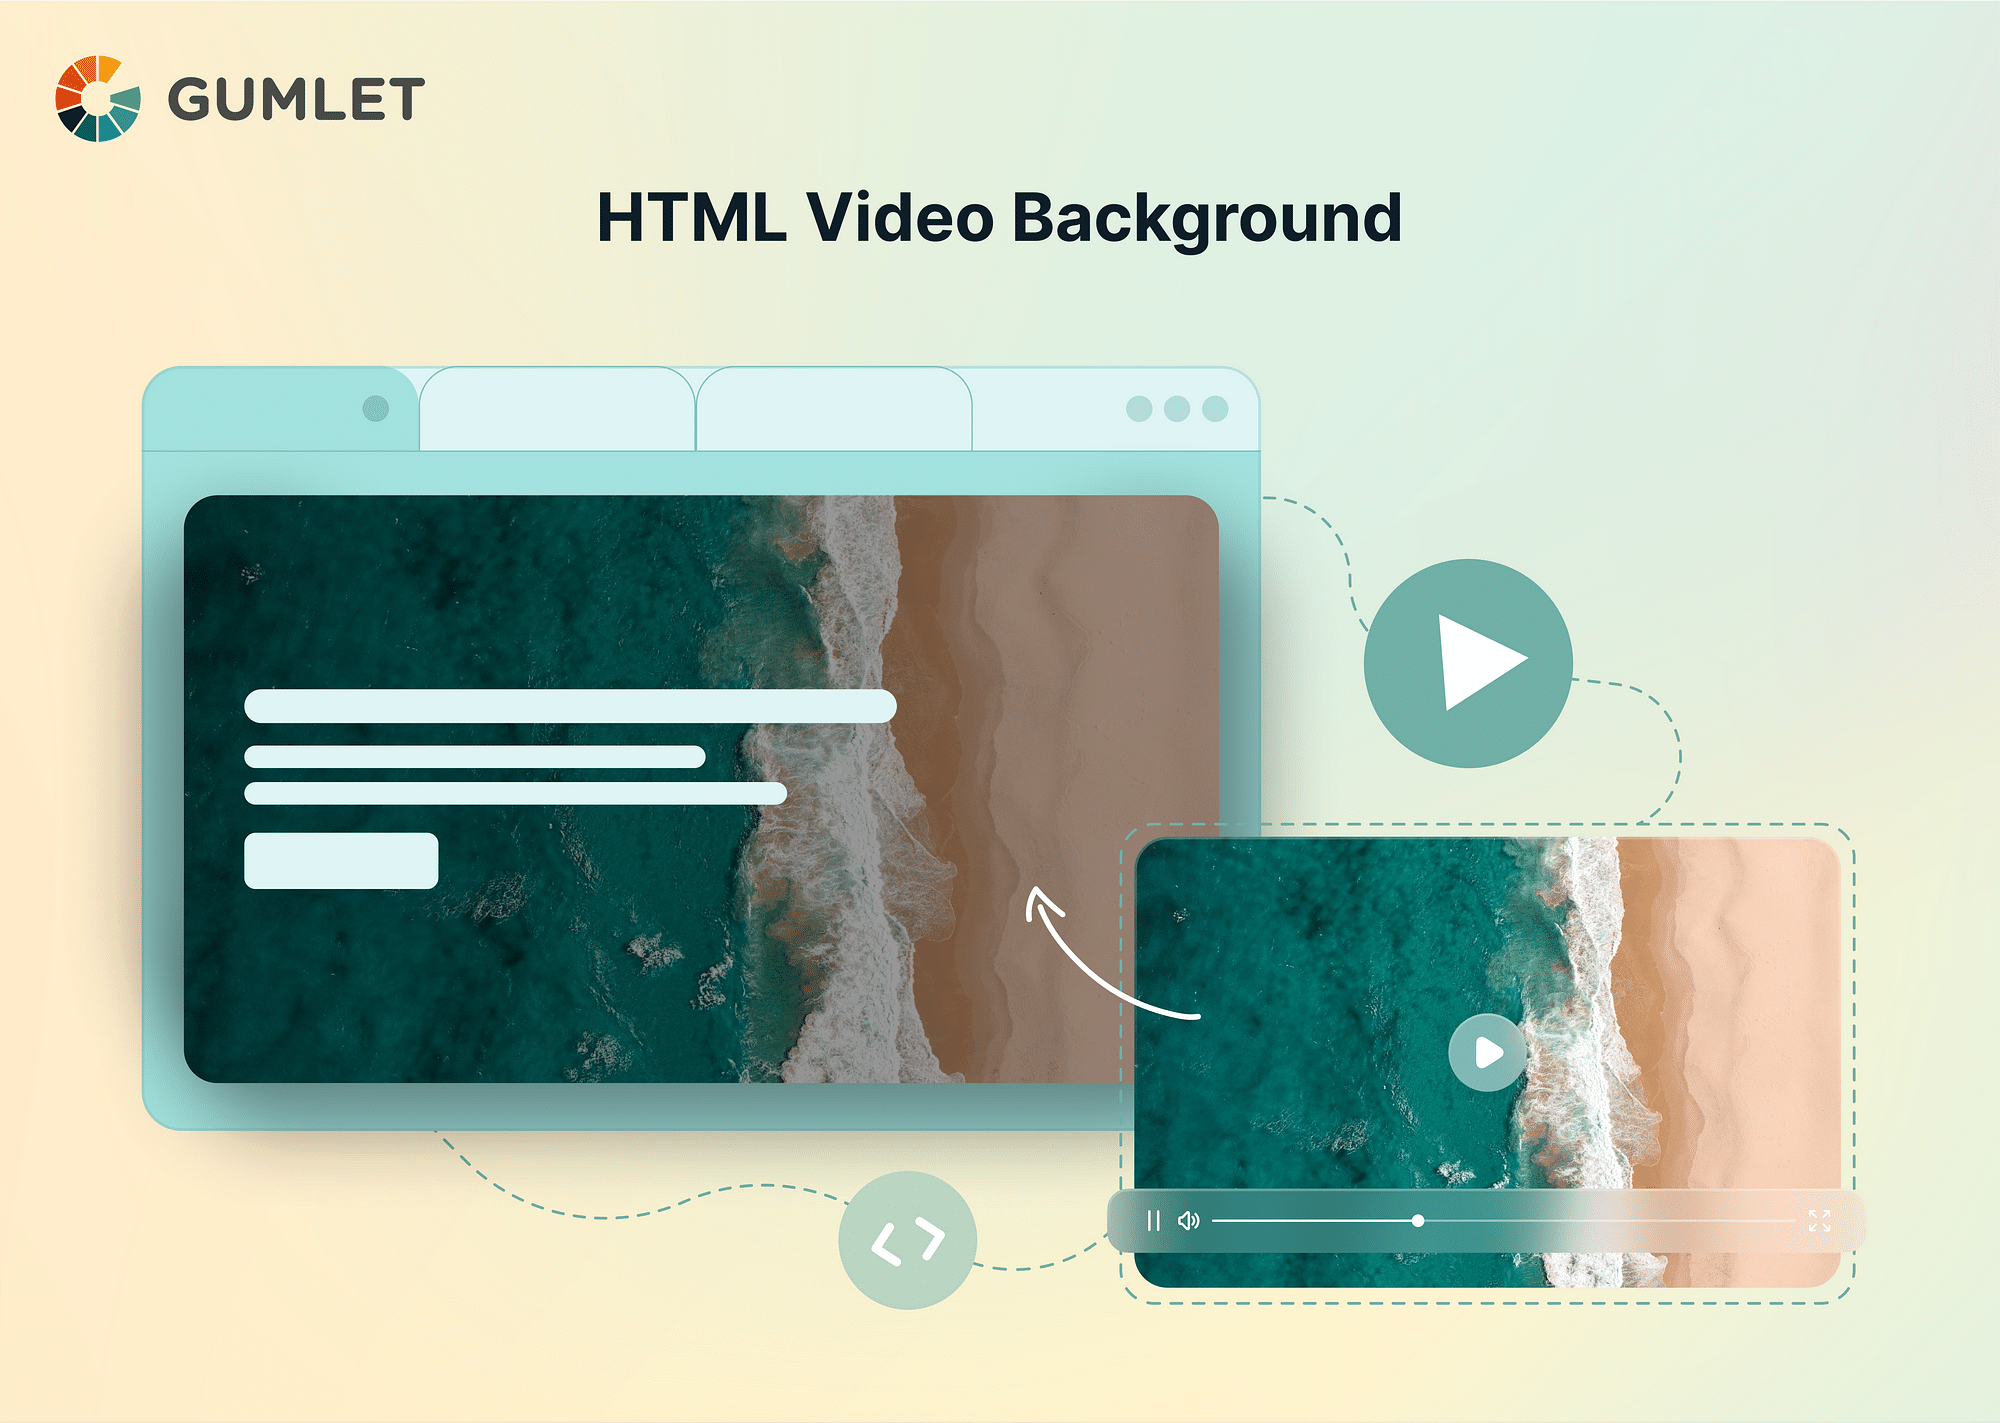 How to add a video background in HTML?